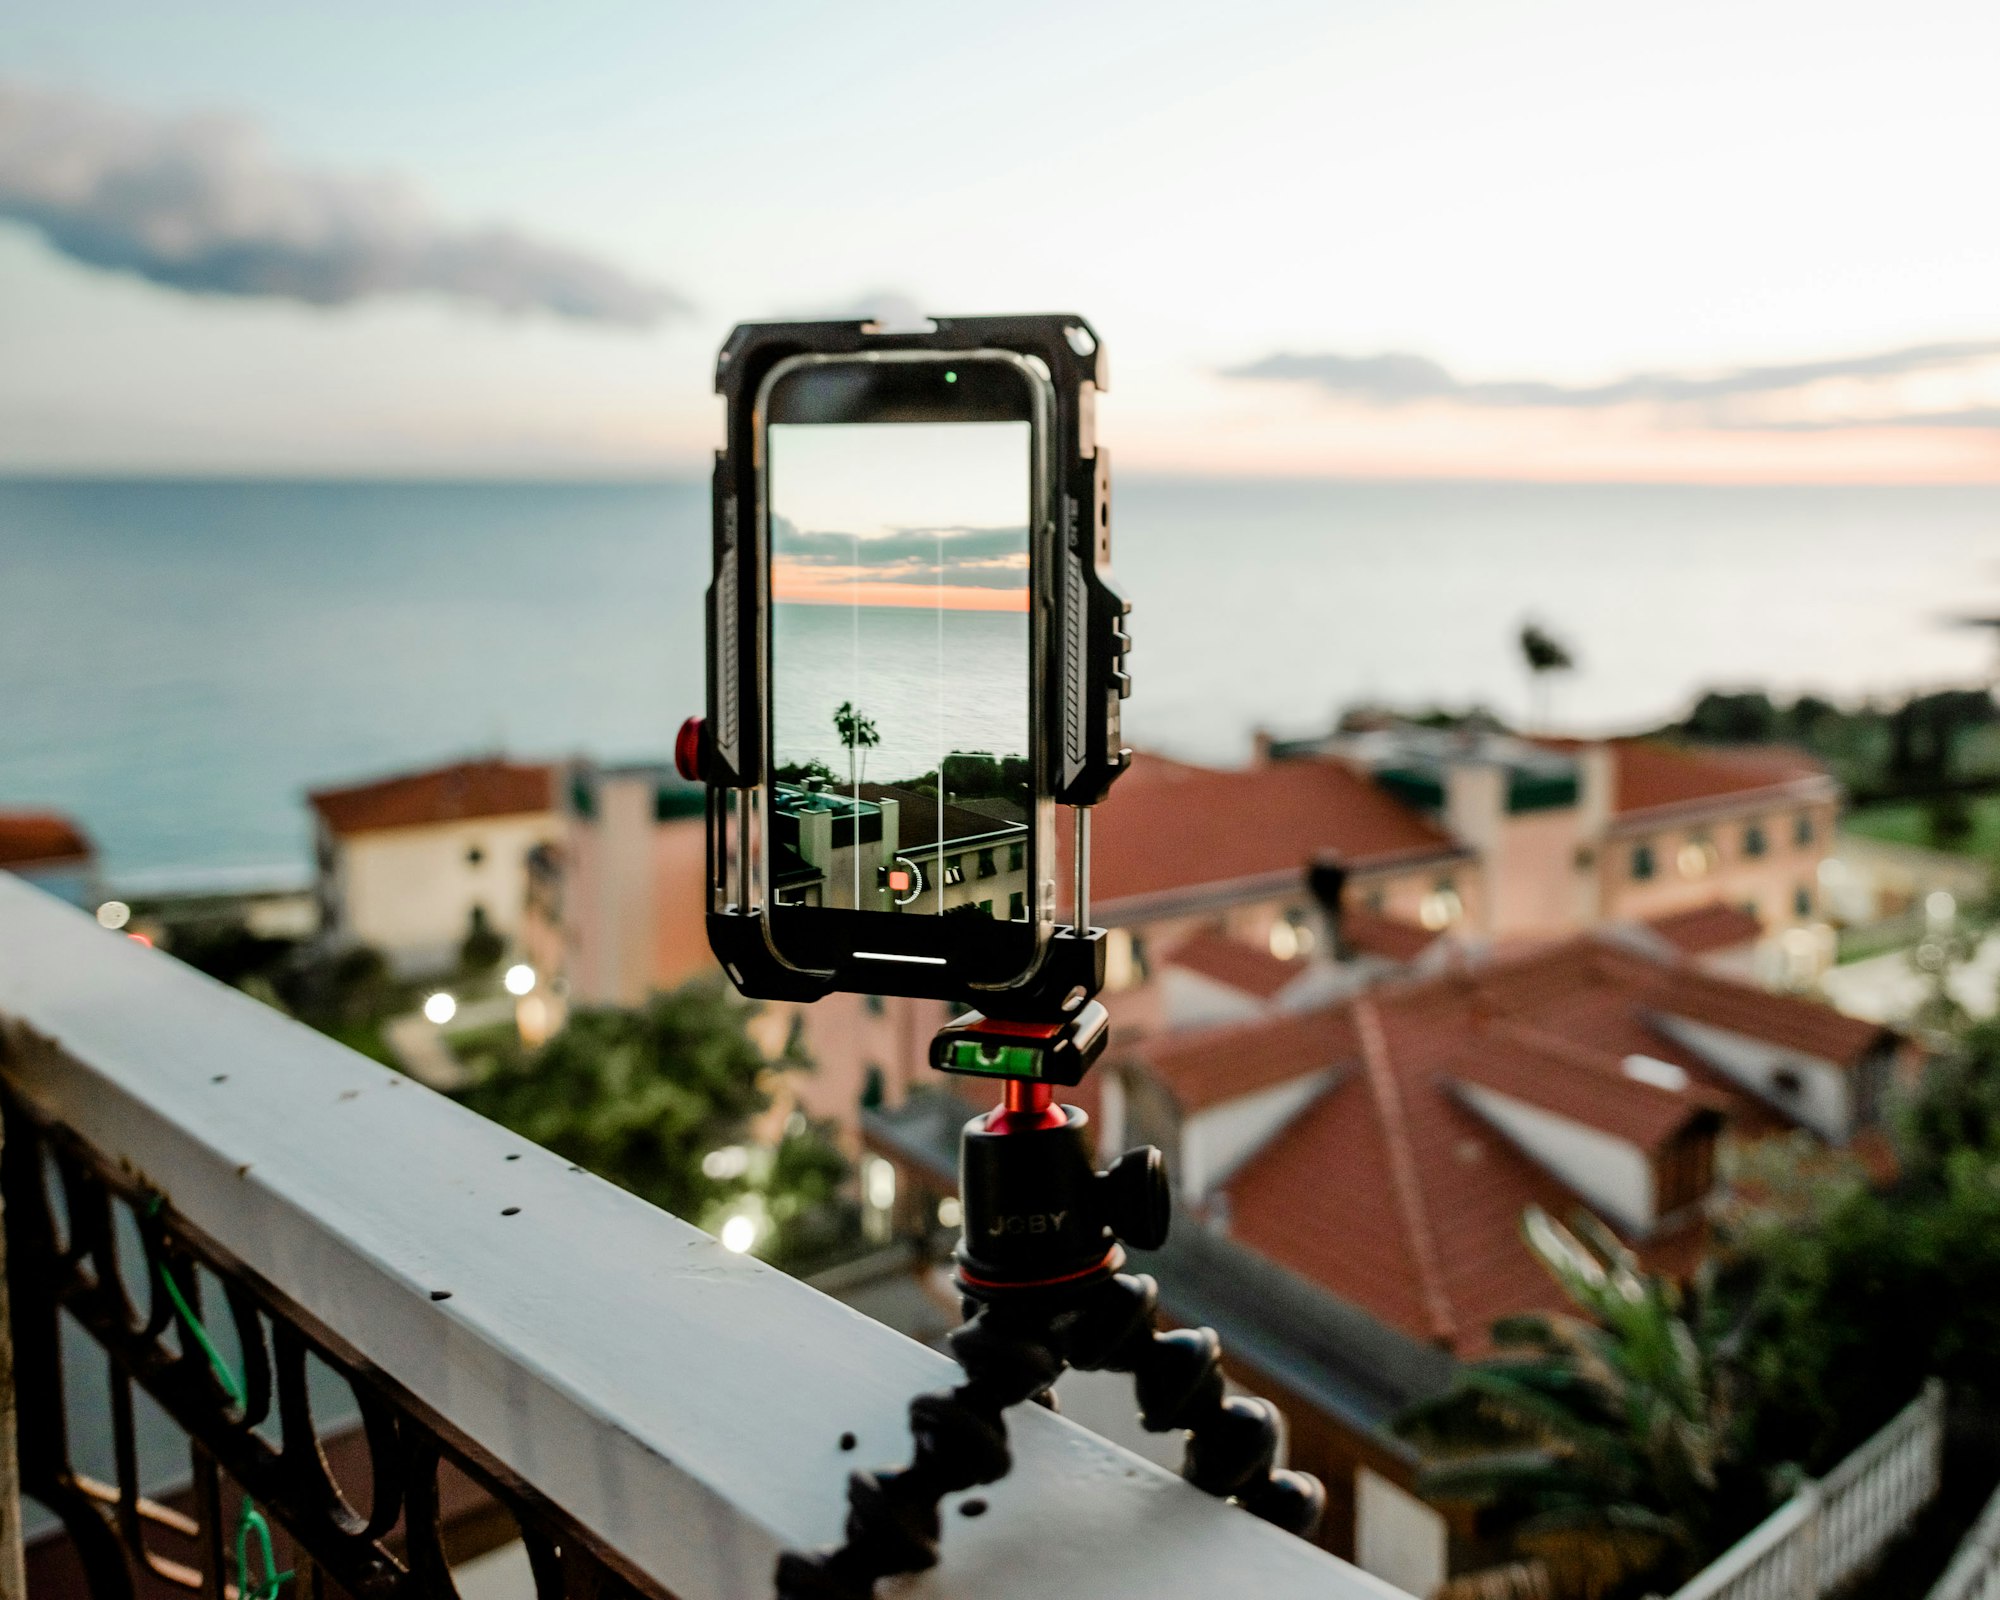 How to make nice timelapse with iphone and gorillapod